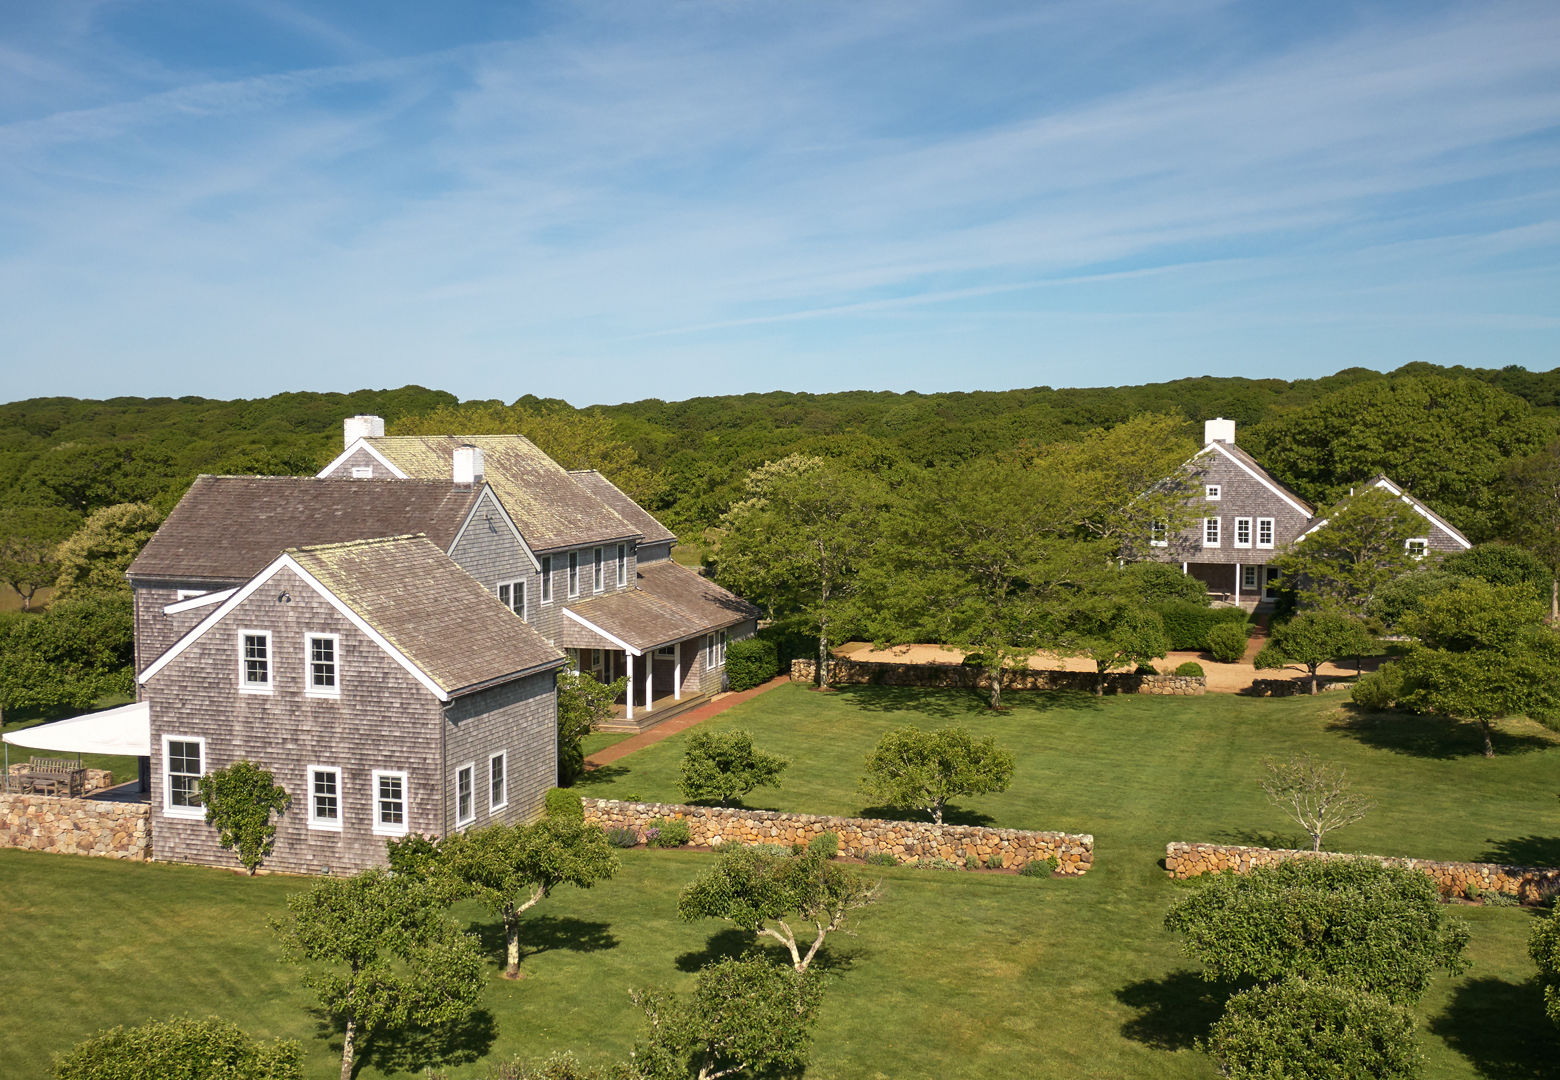 A two-story guest house has four bedrooms and three baths plus a living room, kitchen and laundry. Outbuildings include two garages, a caretaker’s house with three bedrooms, a boat house, a temperature- and humidity- controlled storage building, and a hunting cabin – the only structure when Mrs. Onassis purchased Red Gate Farm. (Laura Moss Photography)